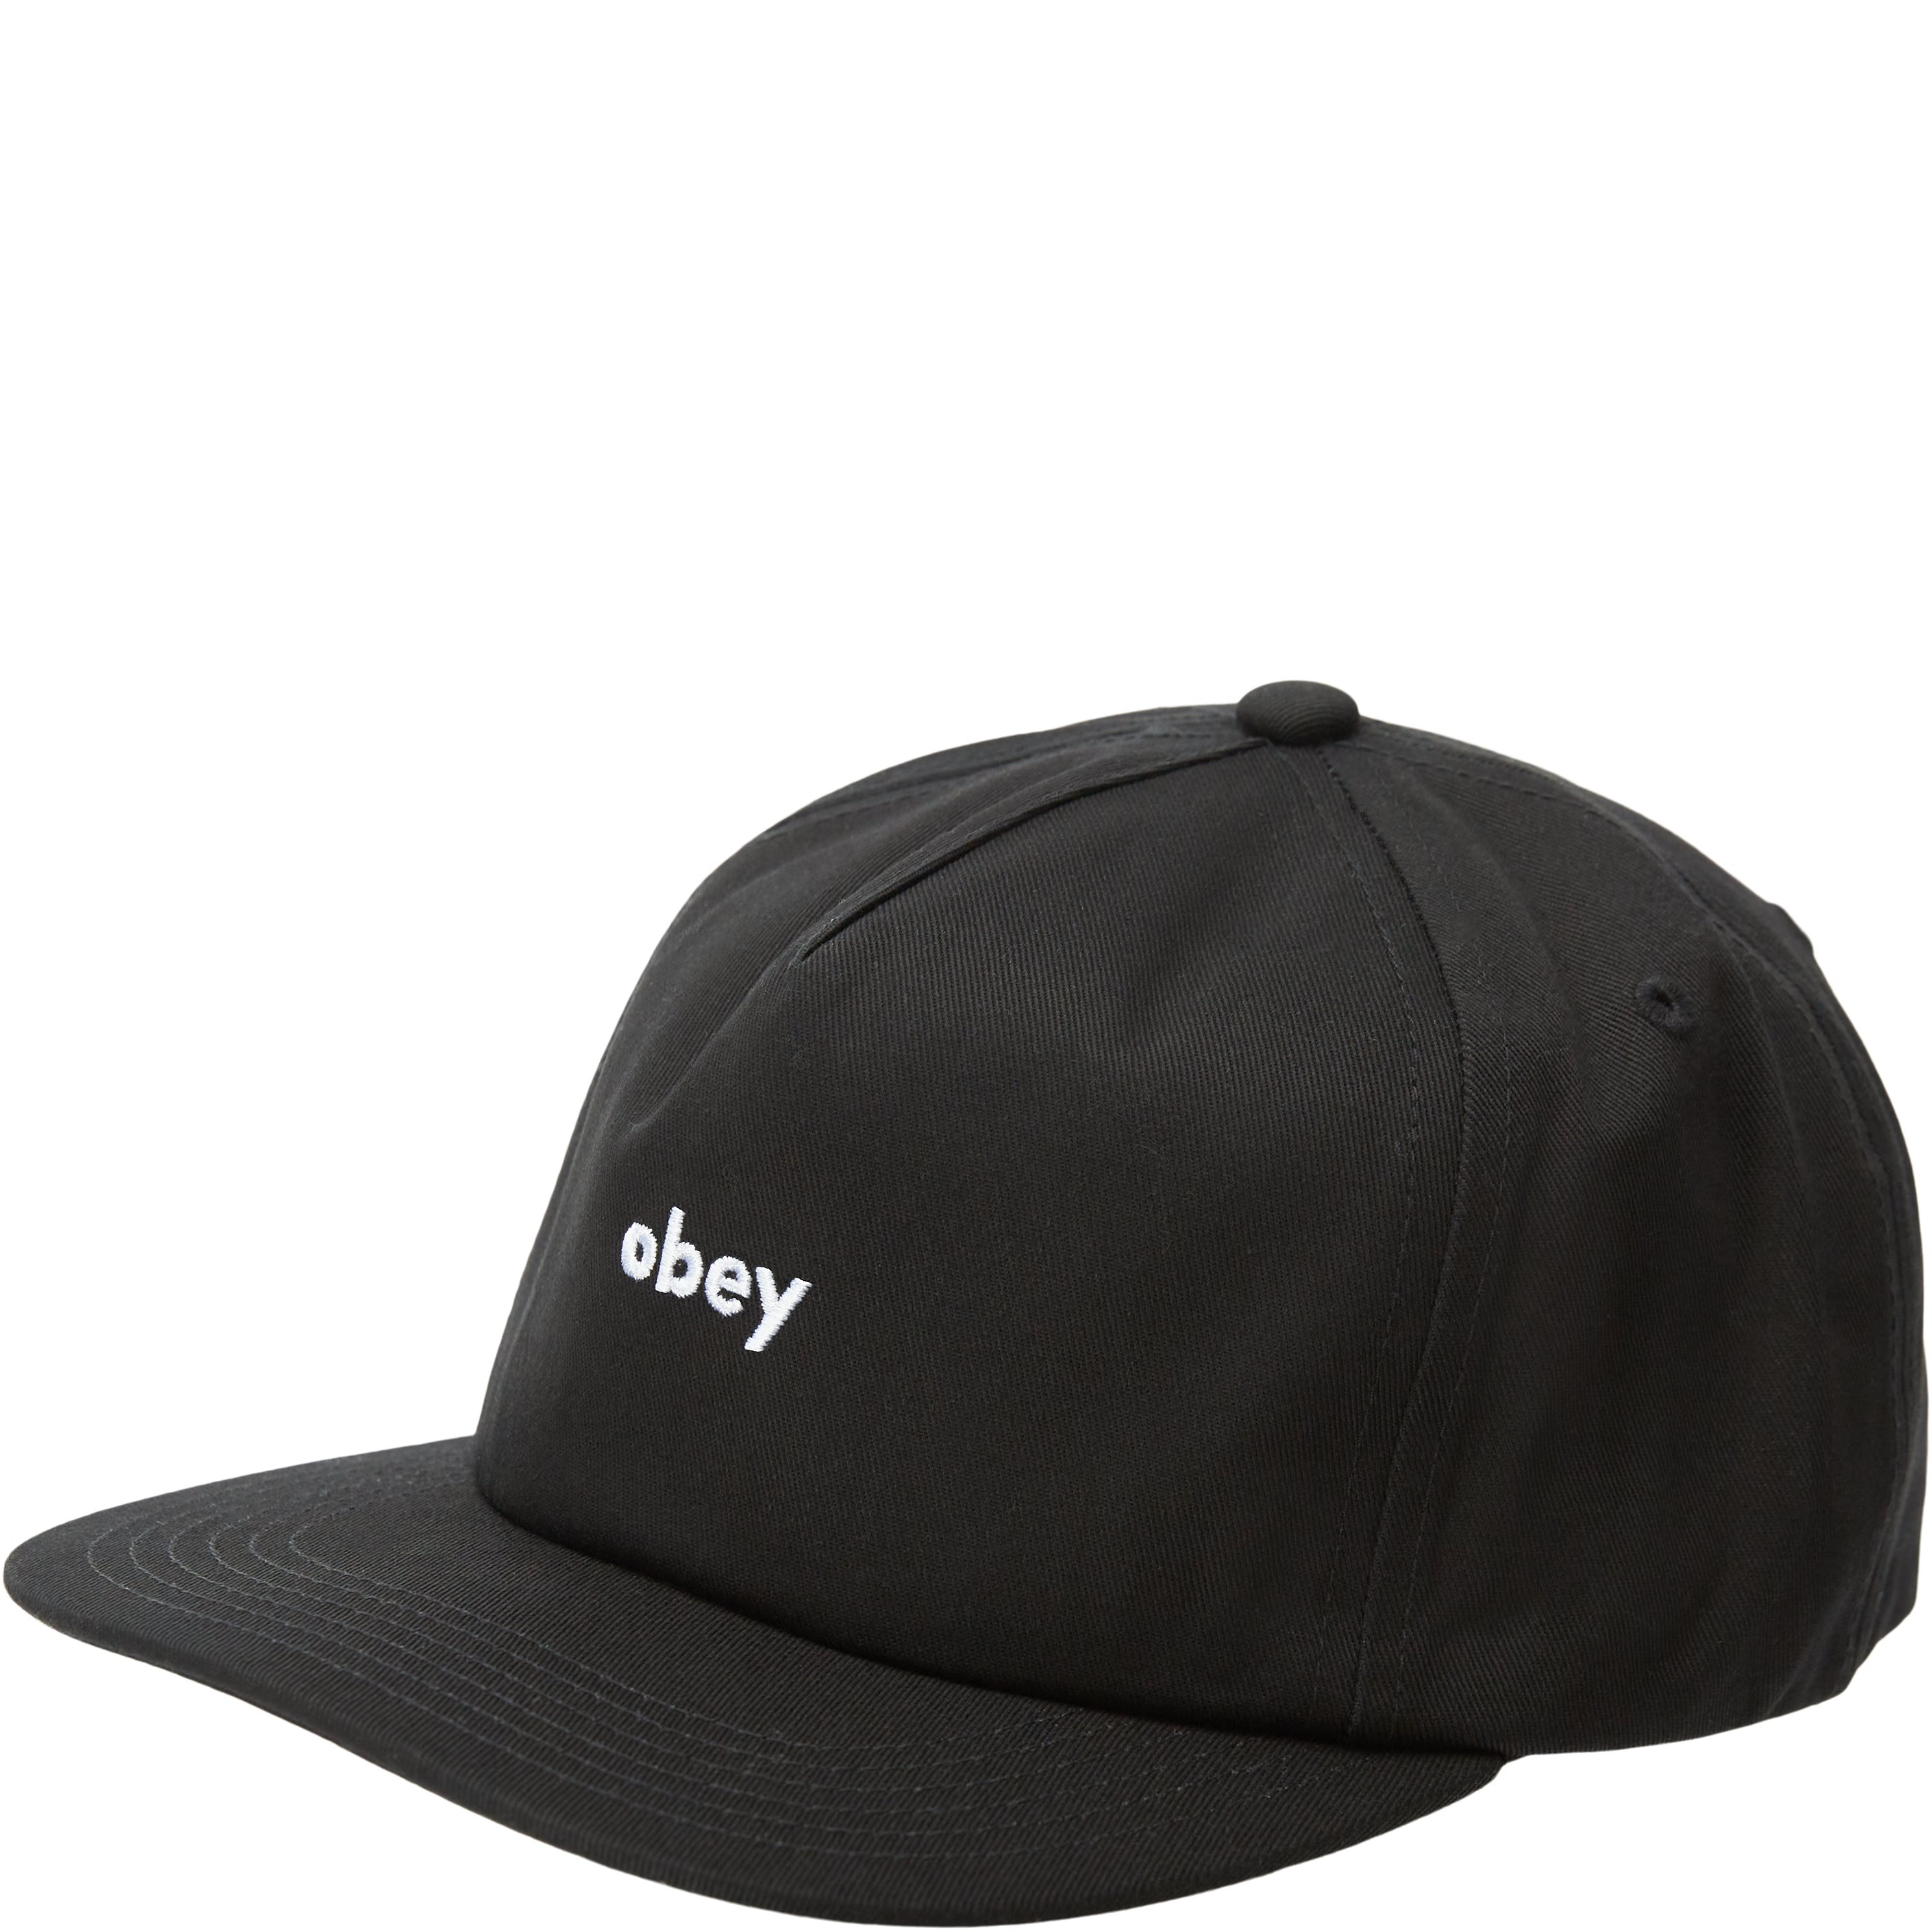 Obey Caps OBEY LOWERCASE 5 PANEL SNAPBACK 100490108 Black